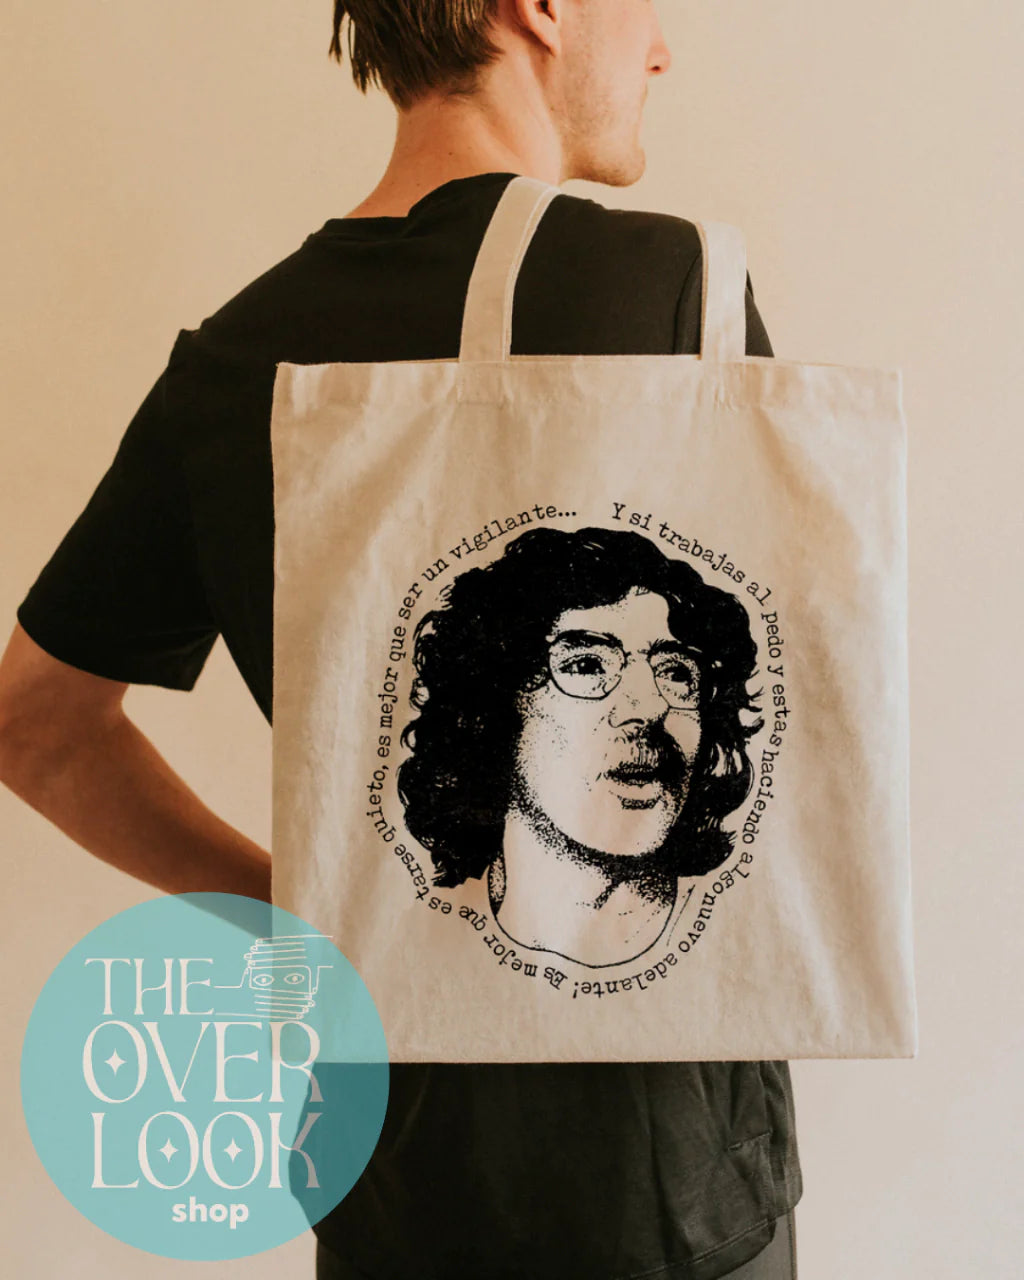 The Over Look: Argentinean Tote Bags and How to Get Them in Spain